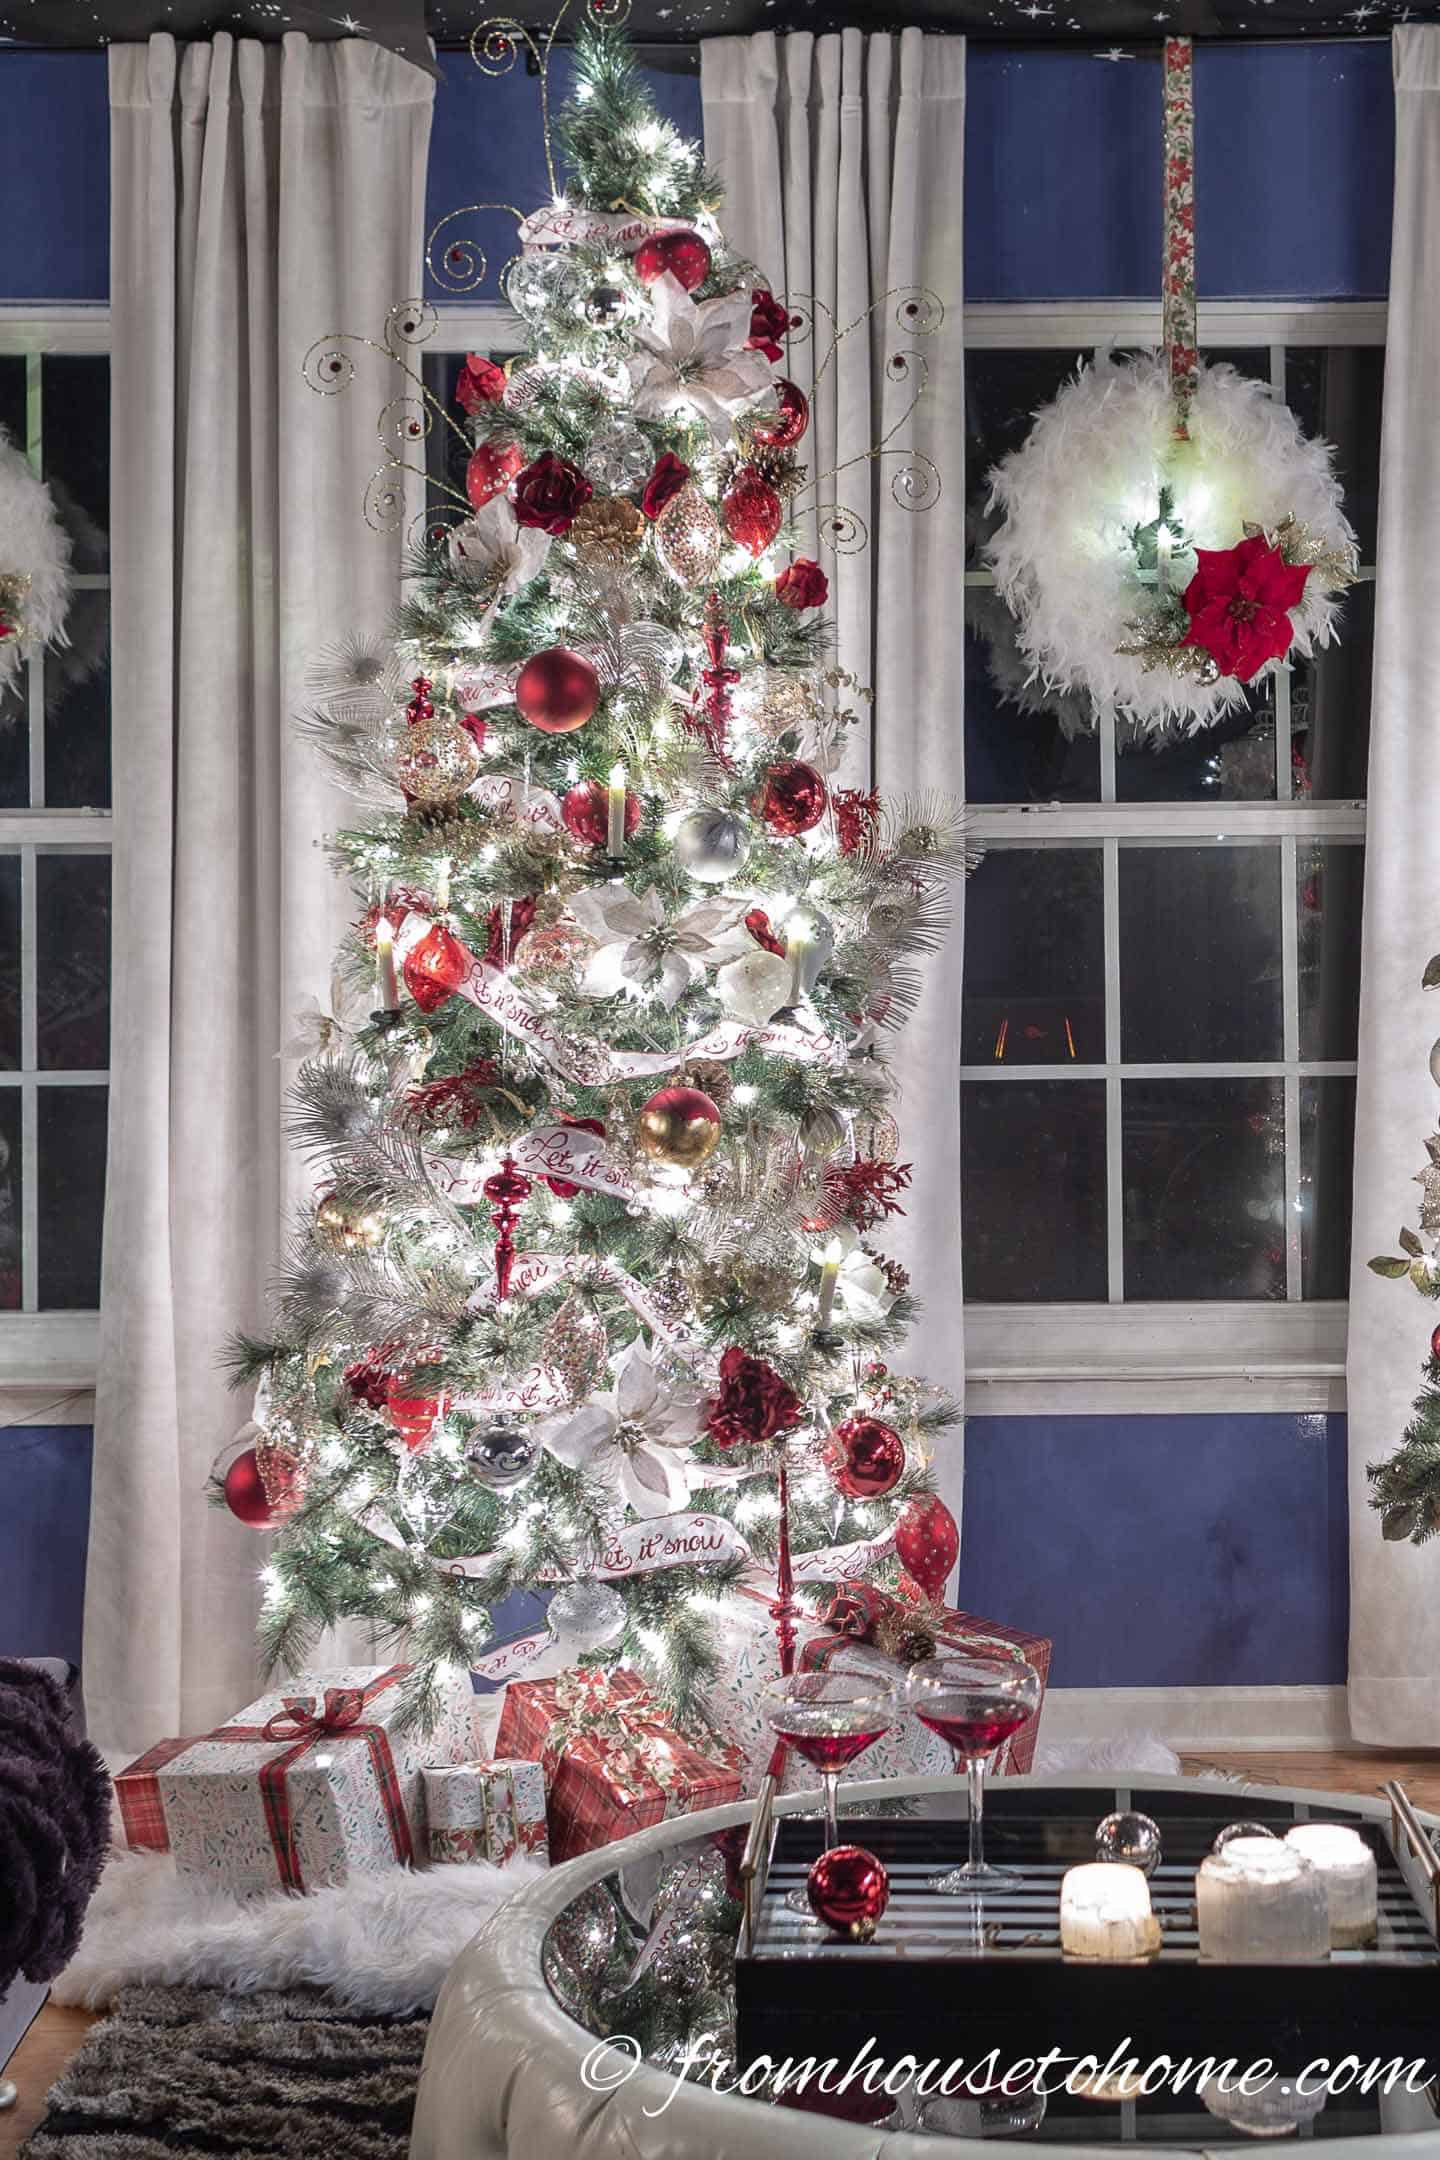 A Christmas tree decorated with red, white and gold Christmas ornaments in front of a window with a white wreath